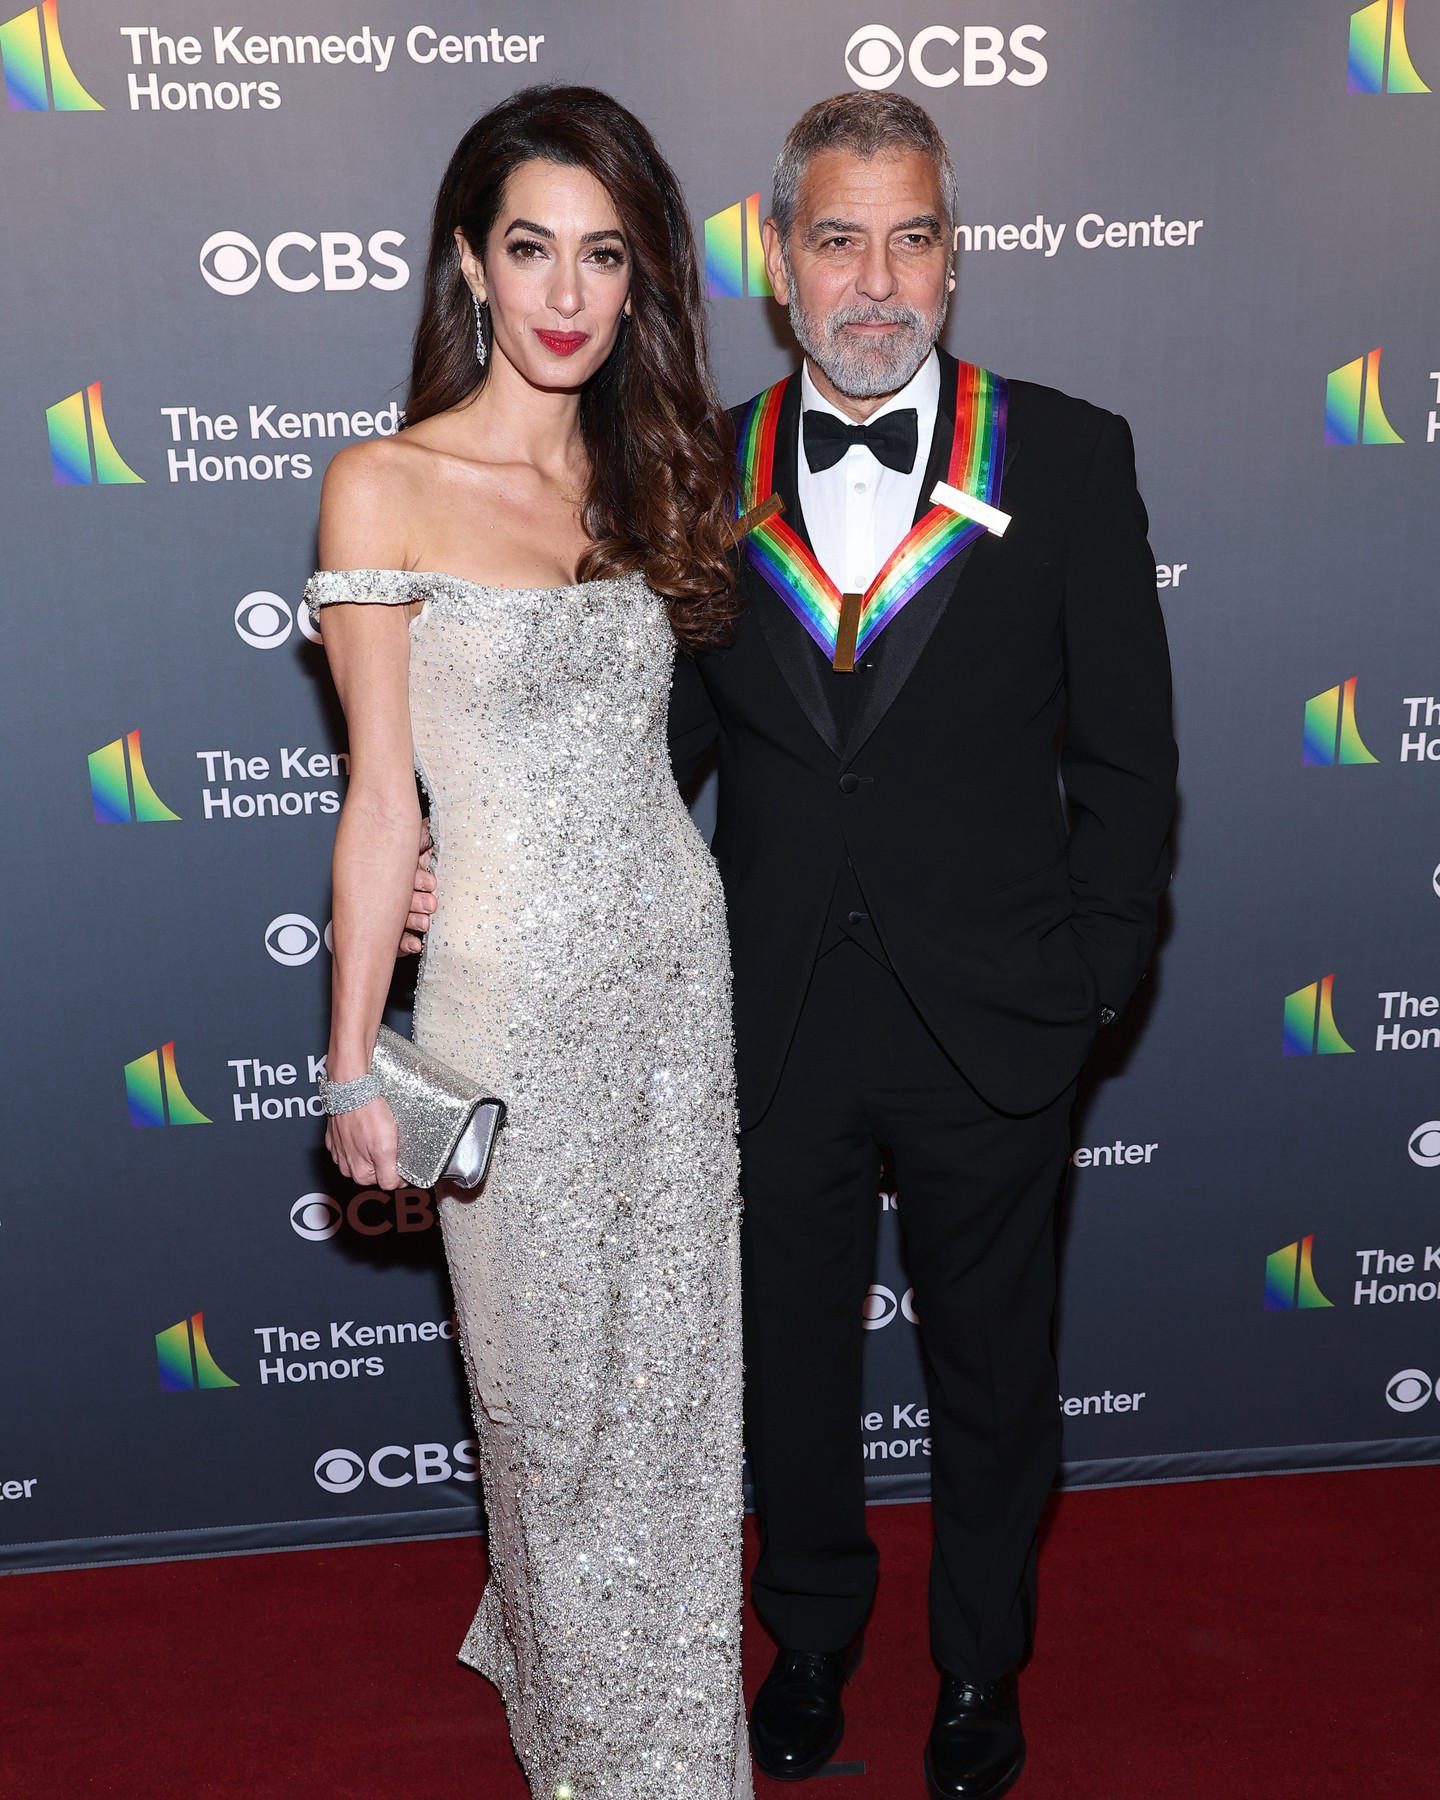 image  1 Vogue - At tonight’s 45th annual Kennedy Center Honors, actor George Clooney is being honored for hi